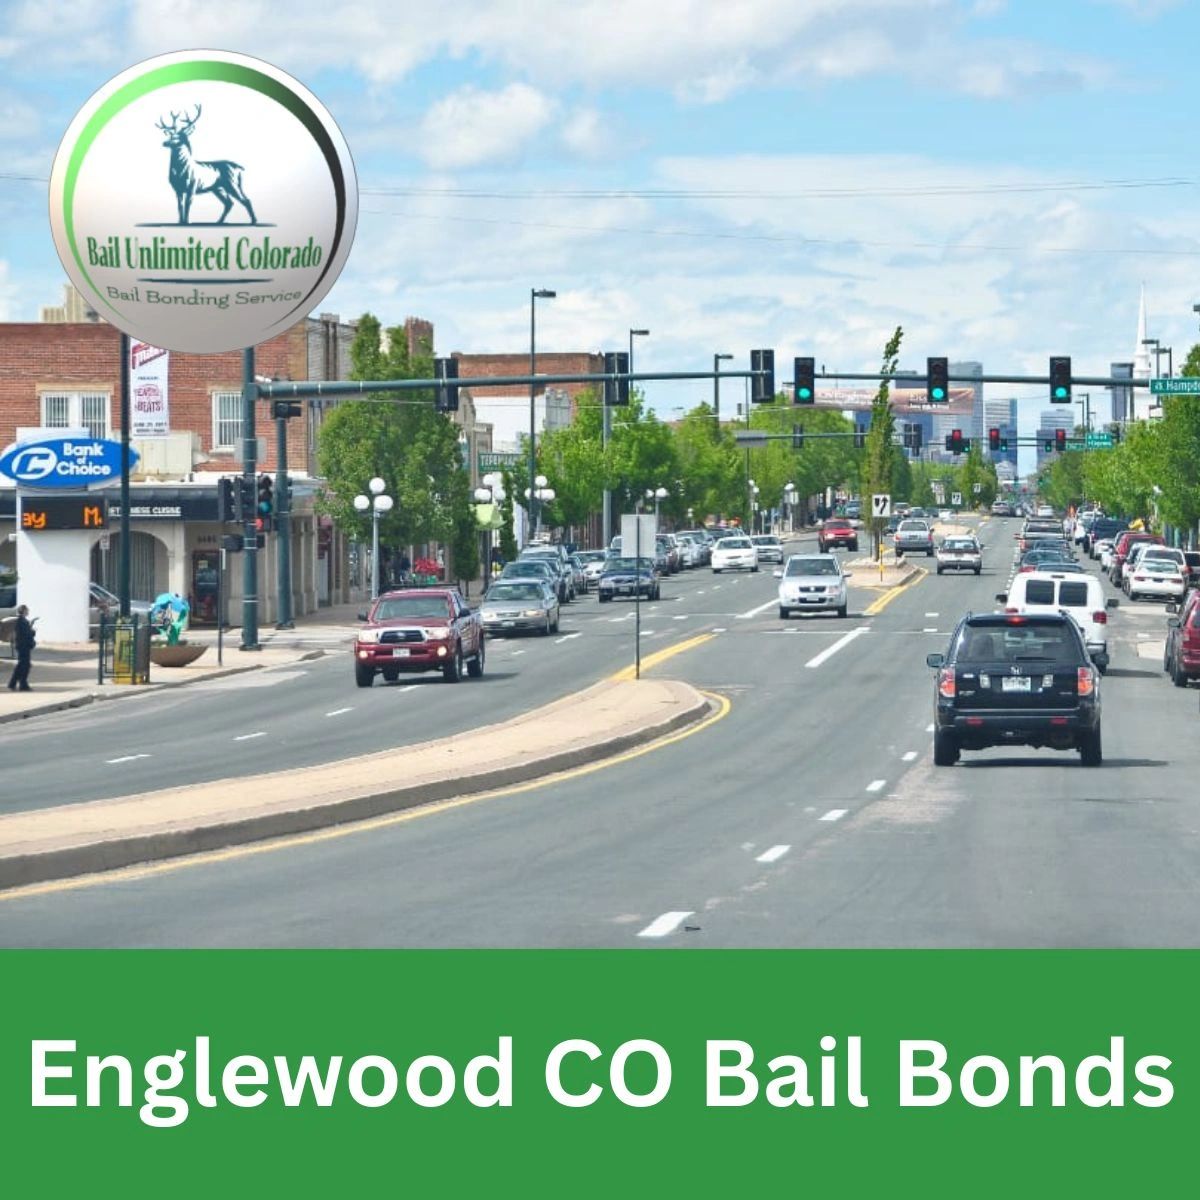 LOGO Bail Unlimited Colorado TEXT Englewood CO Bail Bonds IMAGE Englewood City  39.64776 -104.98775